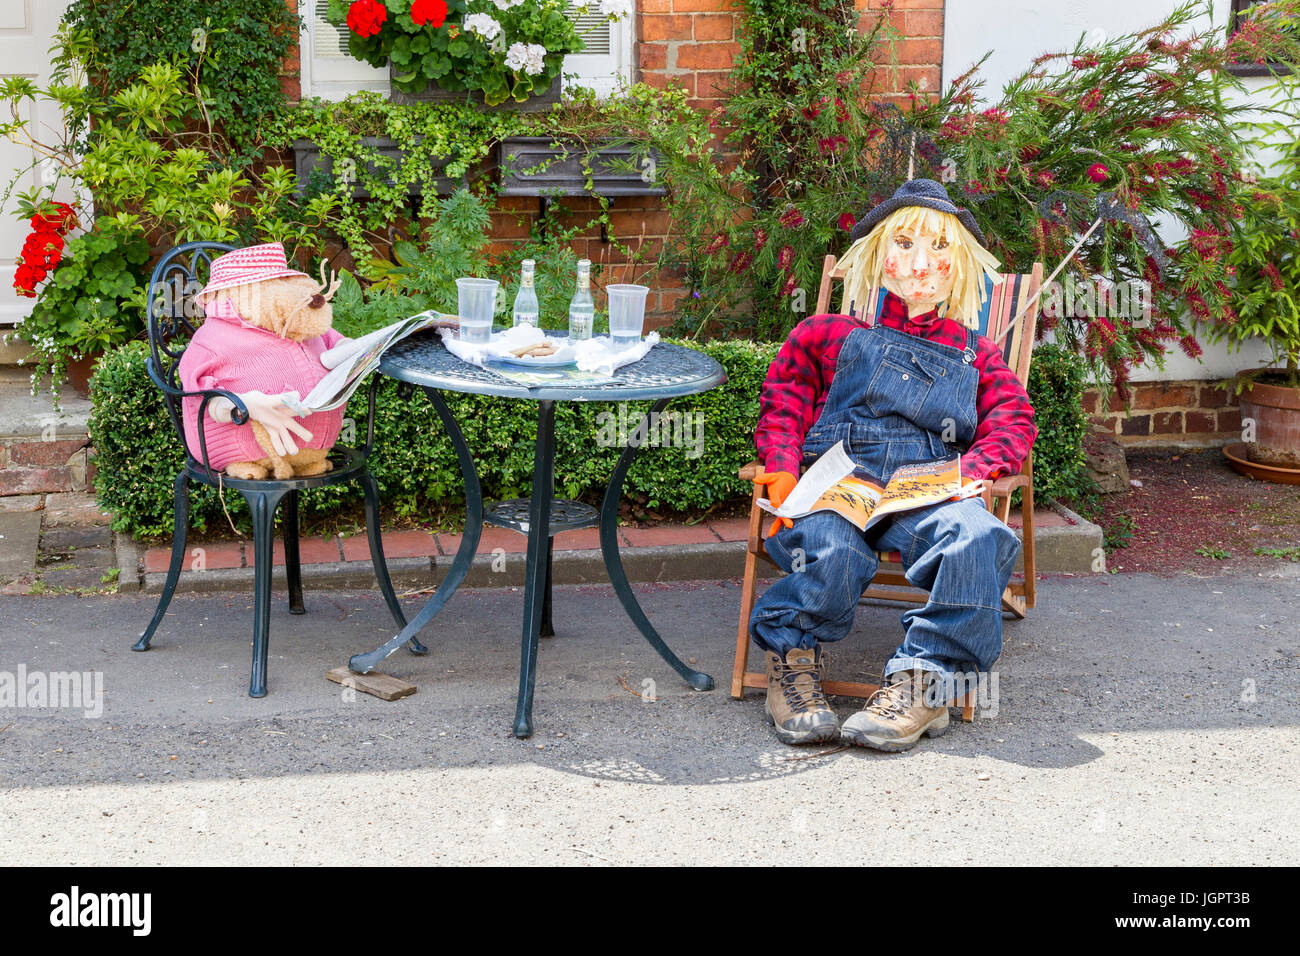 Crick, Northamptonshire, UK. 9th July 2017. Weather. Hot and humid on the second day of the Scarecrow Festival at Crick, lots of people enjoying the day looking at the Scarecrows dotted around the village. Credit: Keith J Smith./Alamy Live News Stock Photo